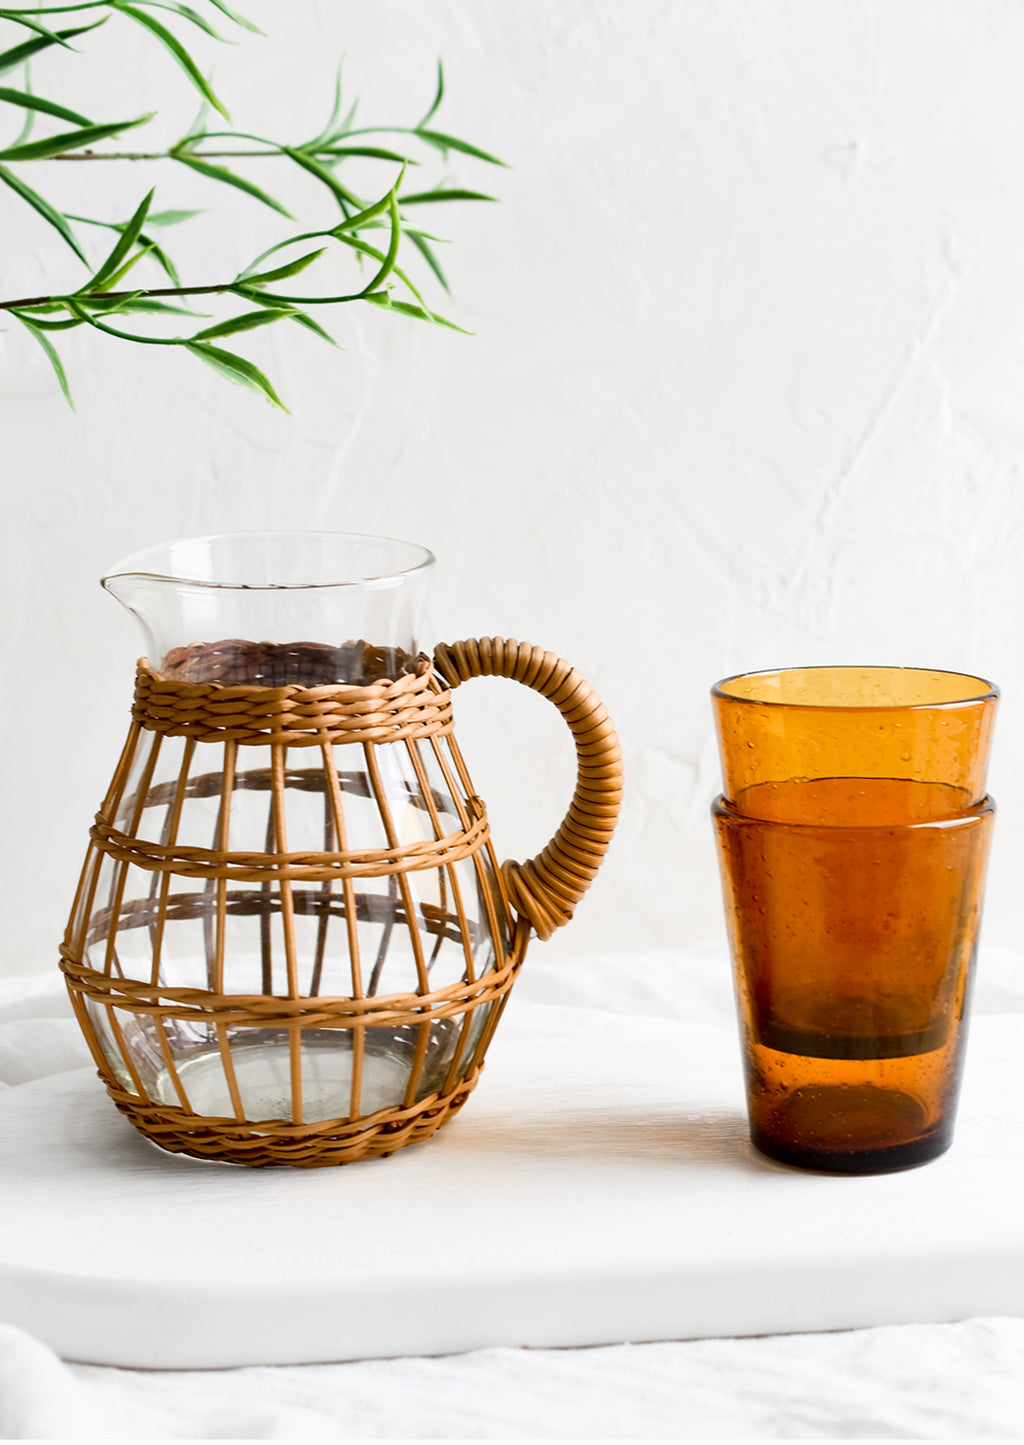 2: A seagrass wrapped pitcher and amber glass cups.